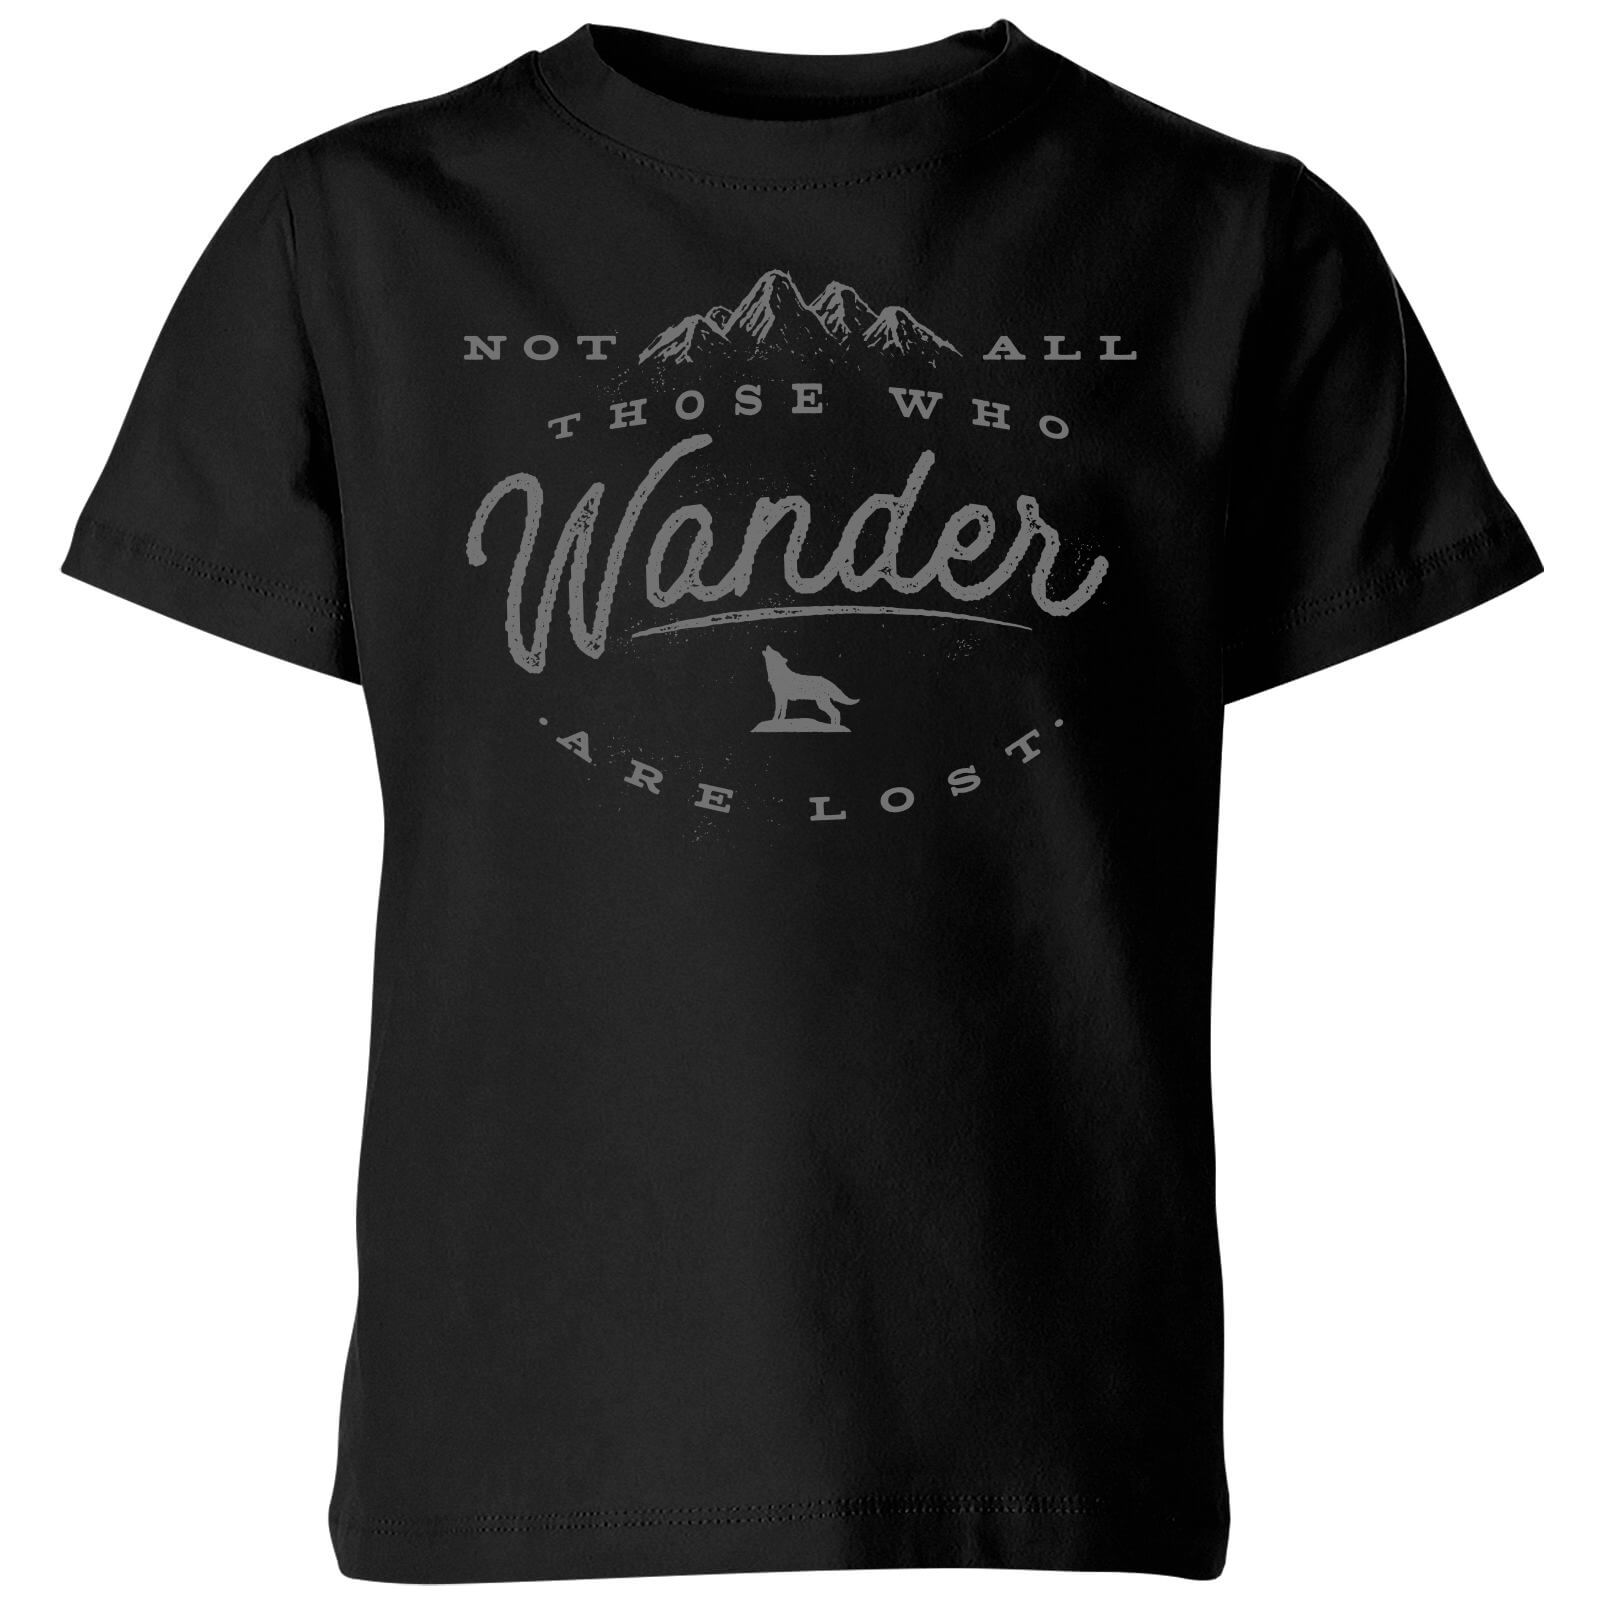 Not All Those Who Wander Are Lost Kids' T-Shirt - Black - 3-4 Years - Black